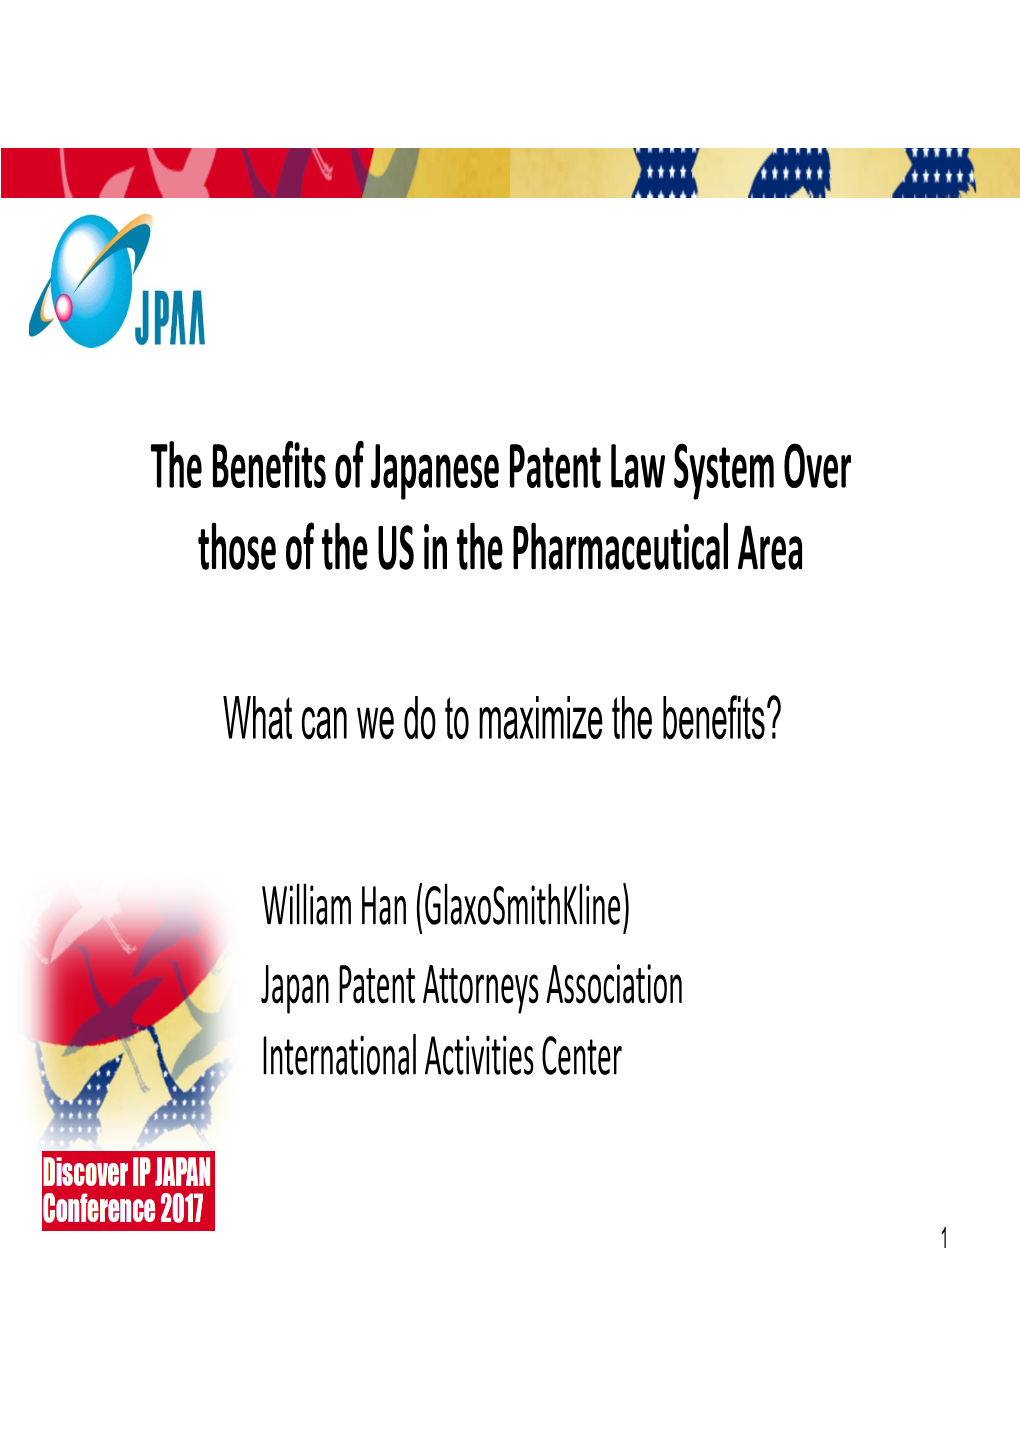 The Benefits of Japanese Patent Law System Over Those of the US in the Pharmaceutical Area